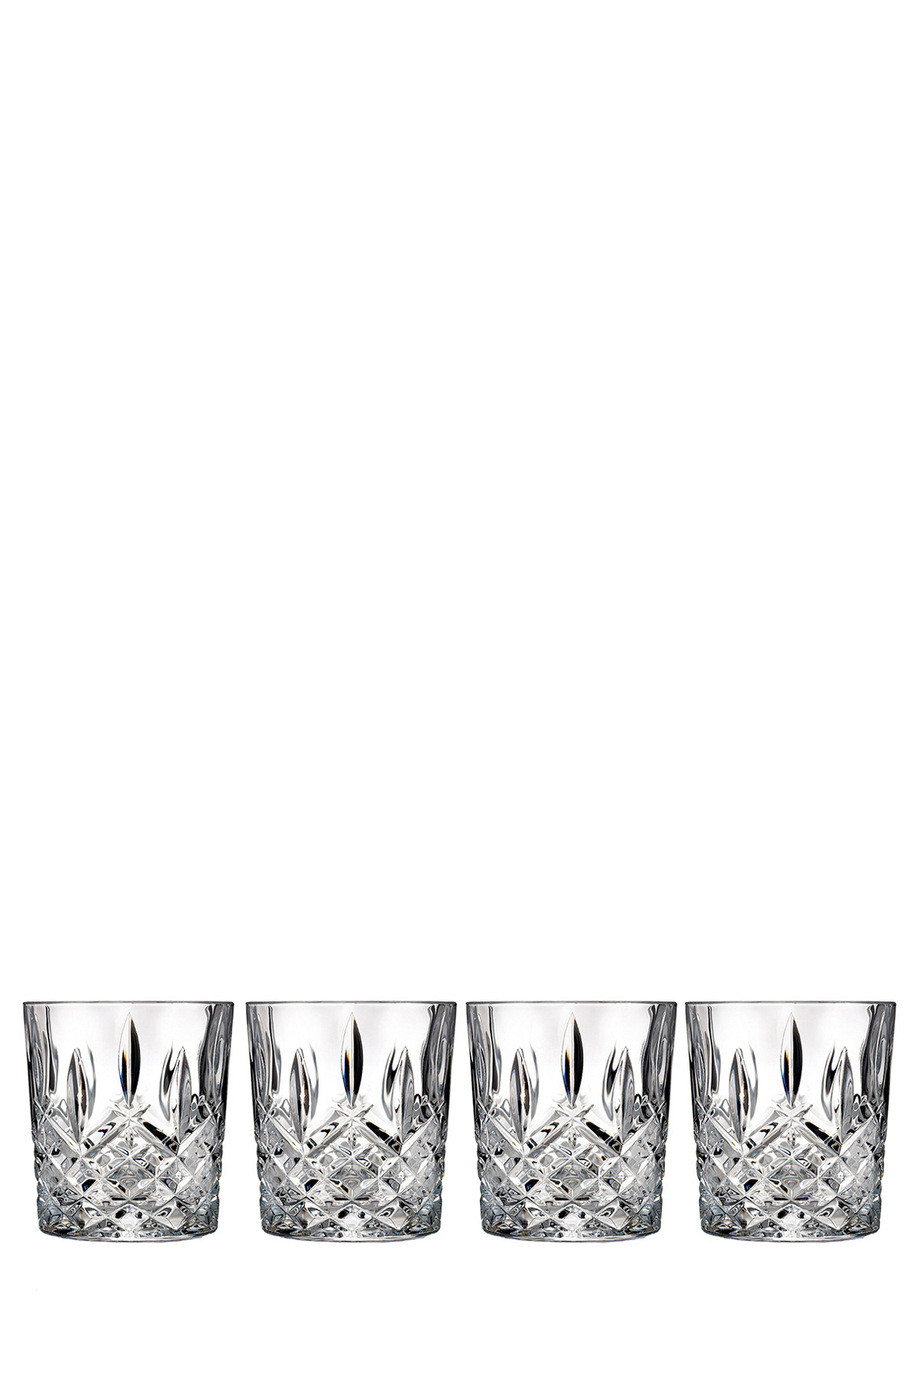 14 attractive Waterford Markham Vase 2024 free download waterford markham vase of marquis by waterford markham tumbler set of 4 myer online within 502576570 zm 1